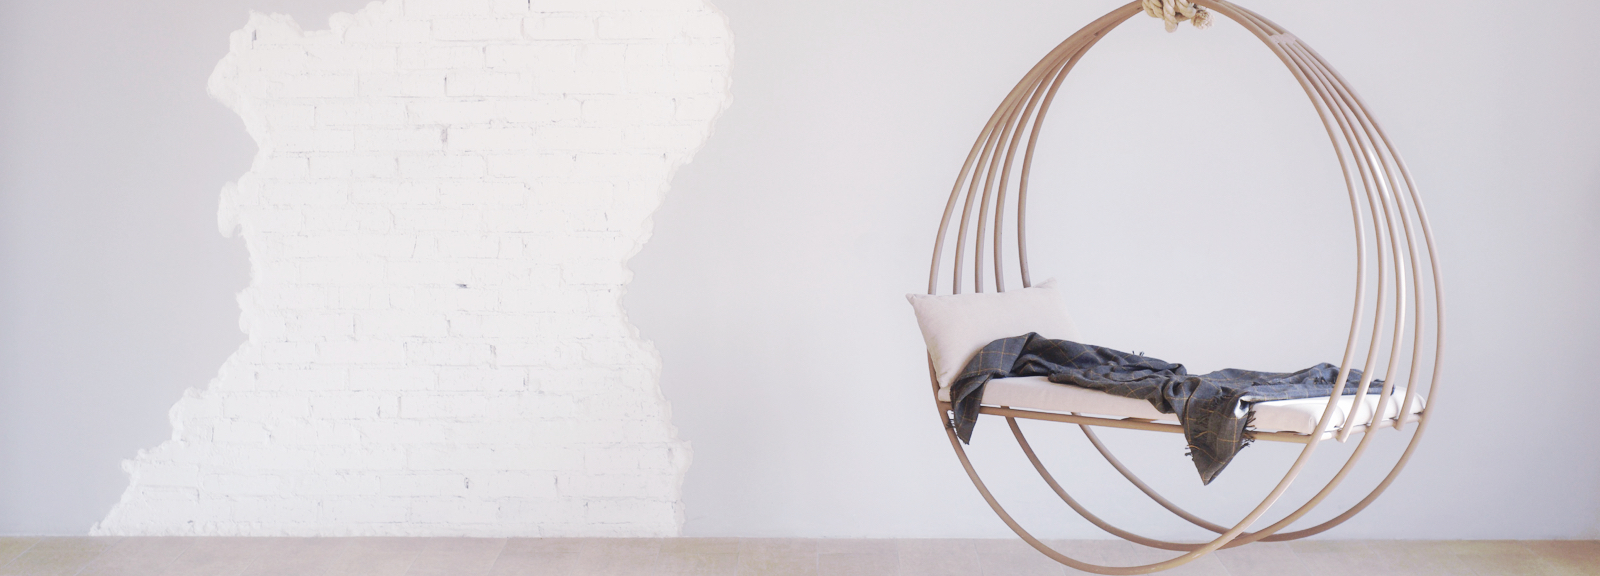 Hanging bed with frame suspended between circular tubes of wood